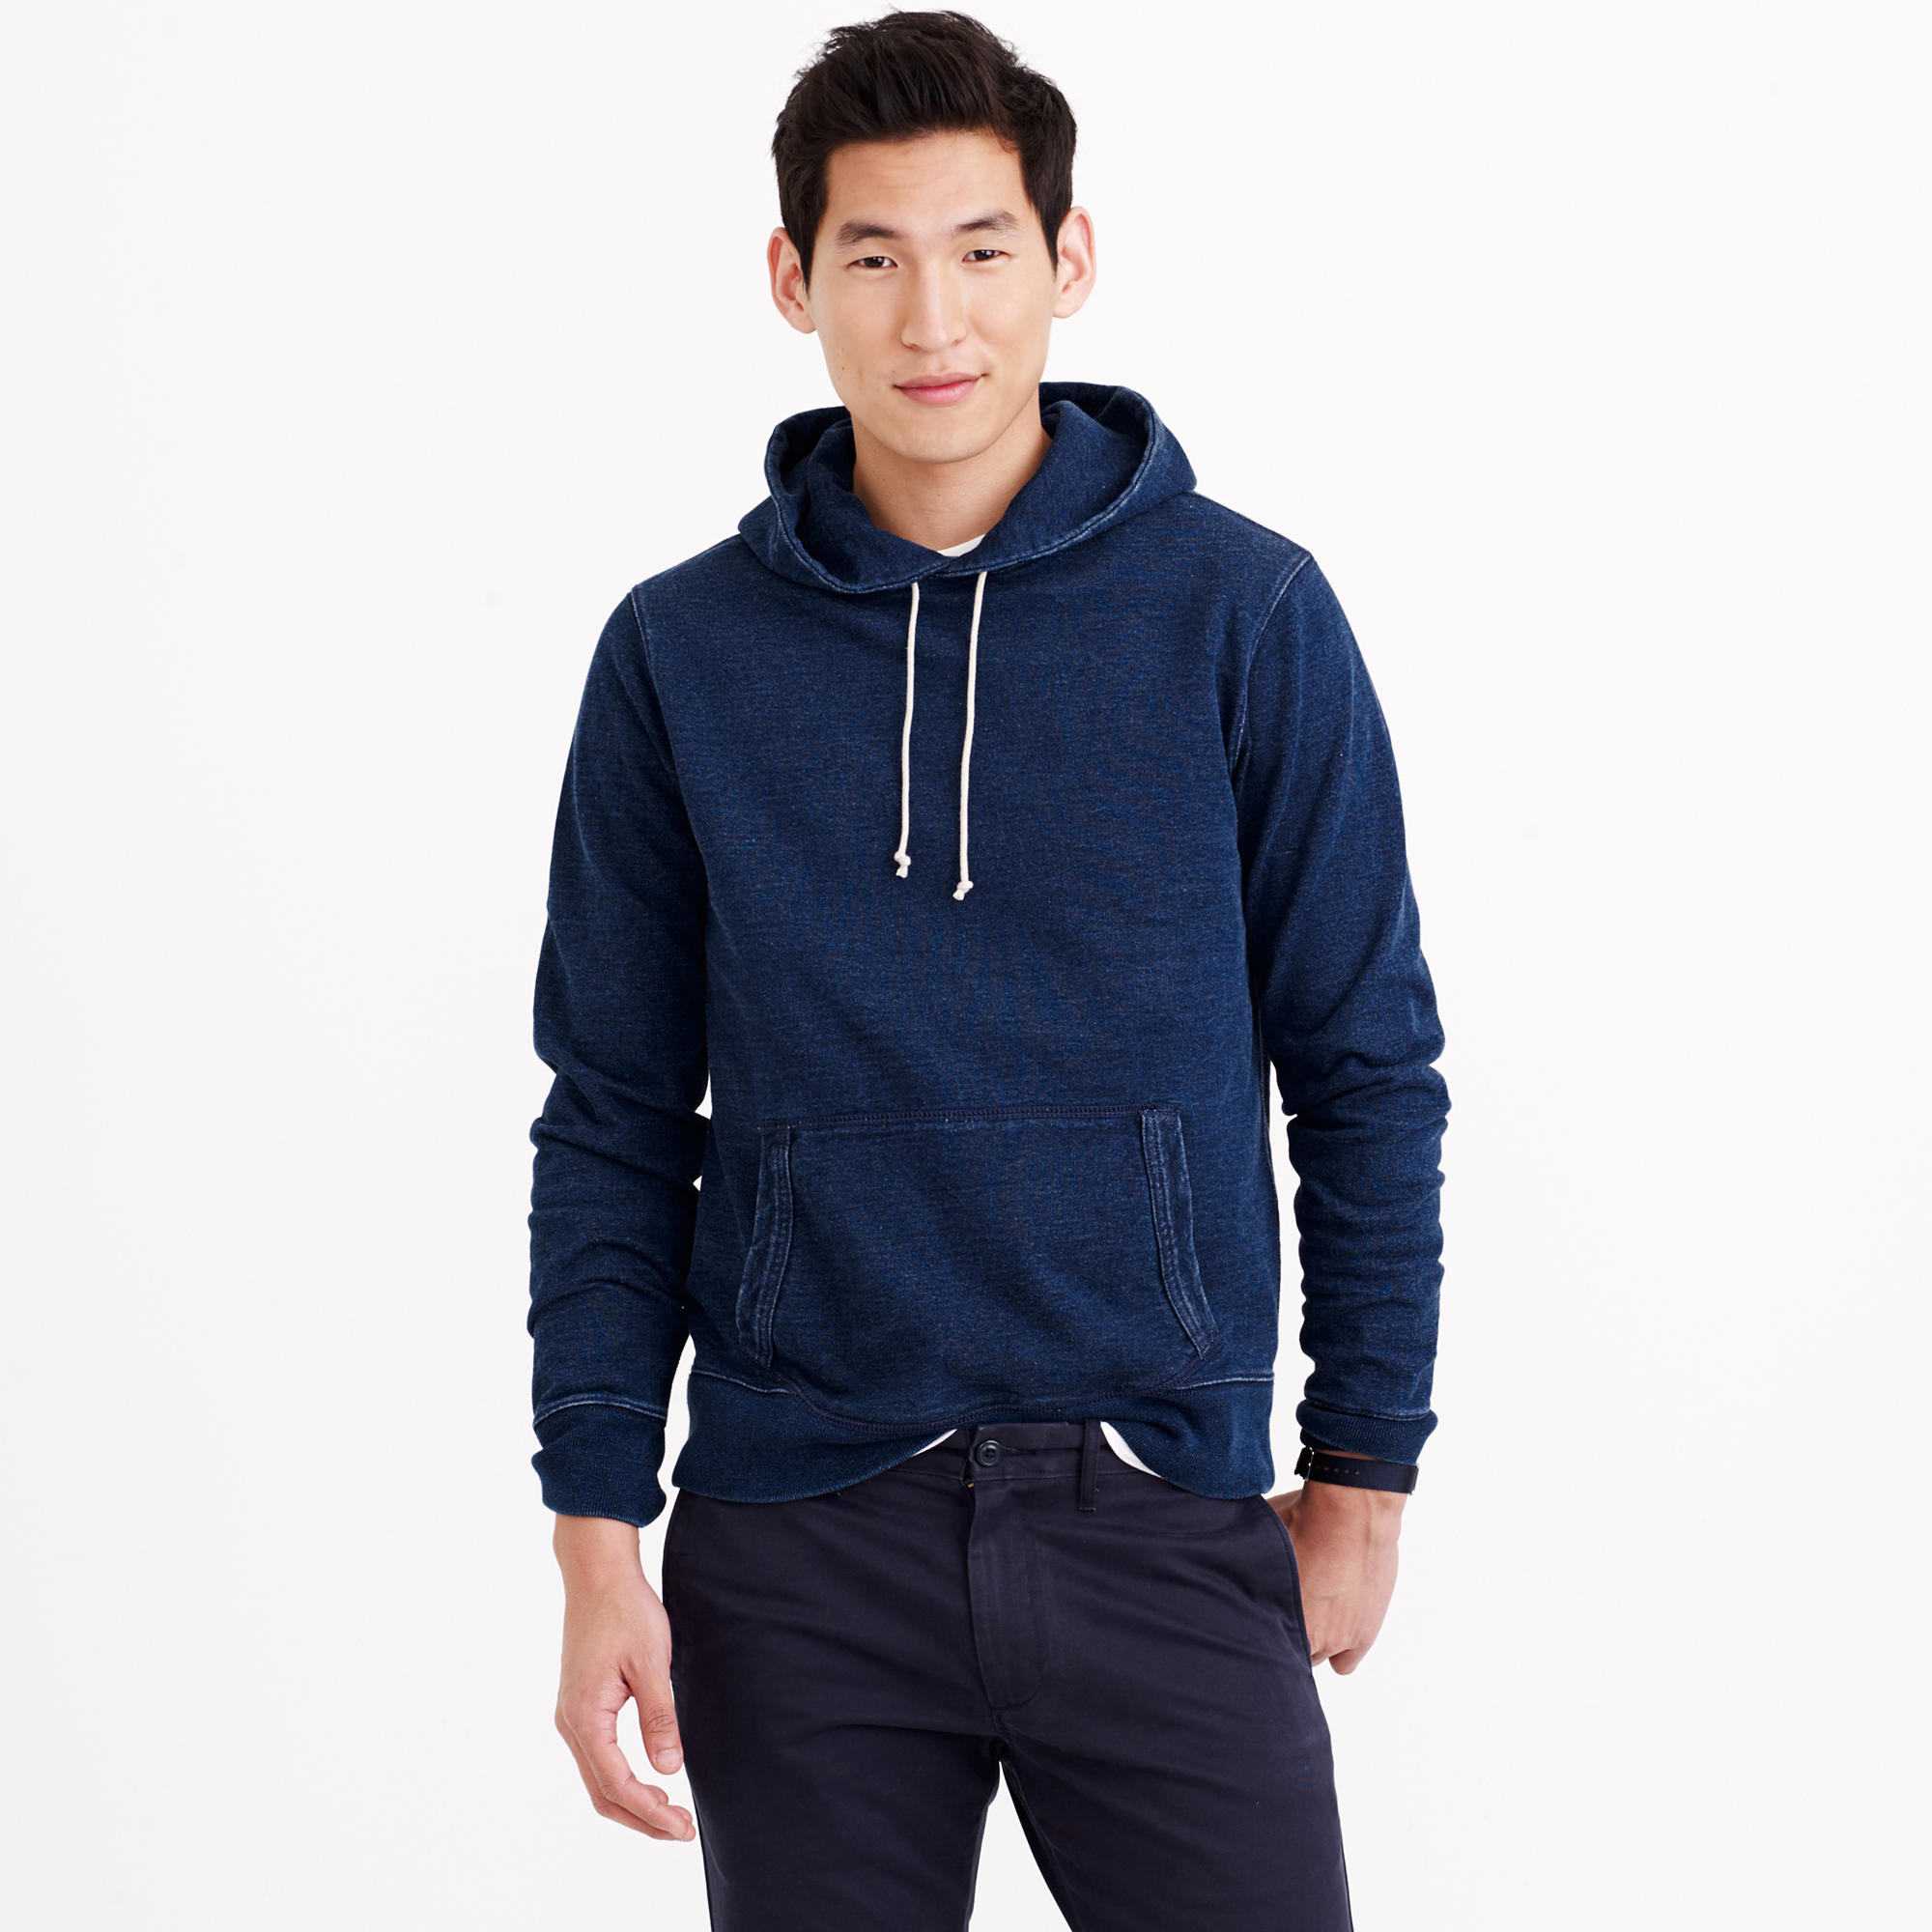 Lyst - J.Crew Wallace & Barnes Indigo Pullover Hoodie in Blue for Men